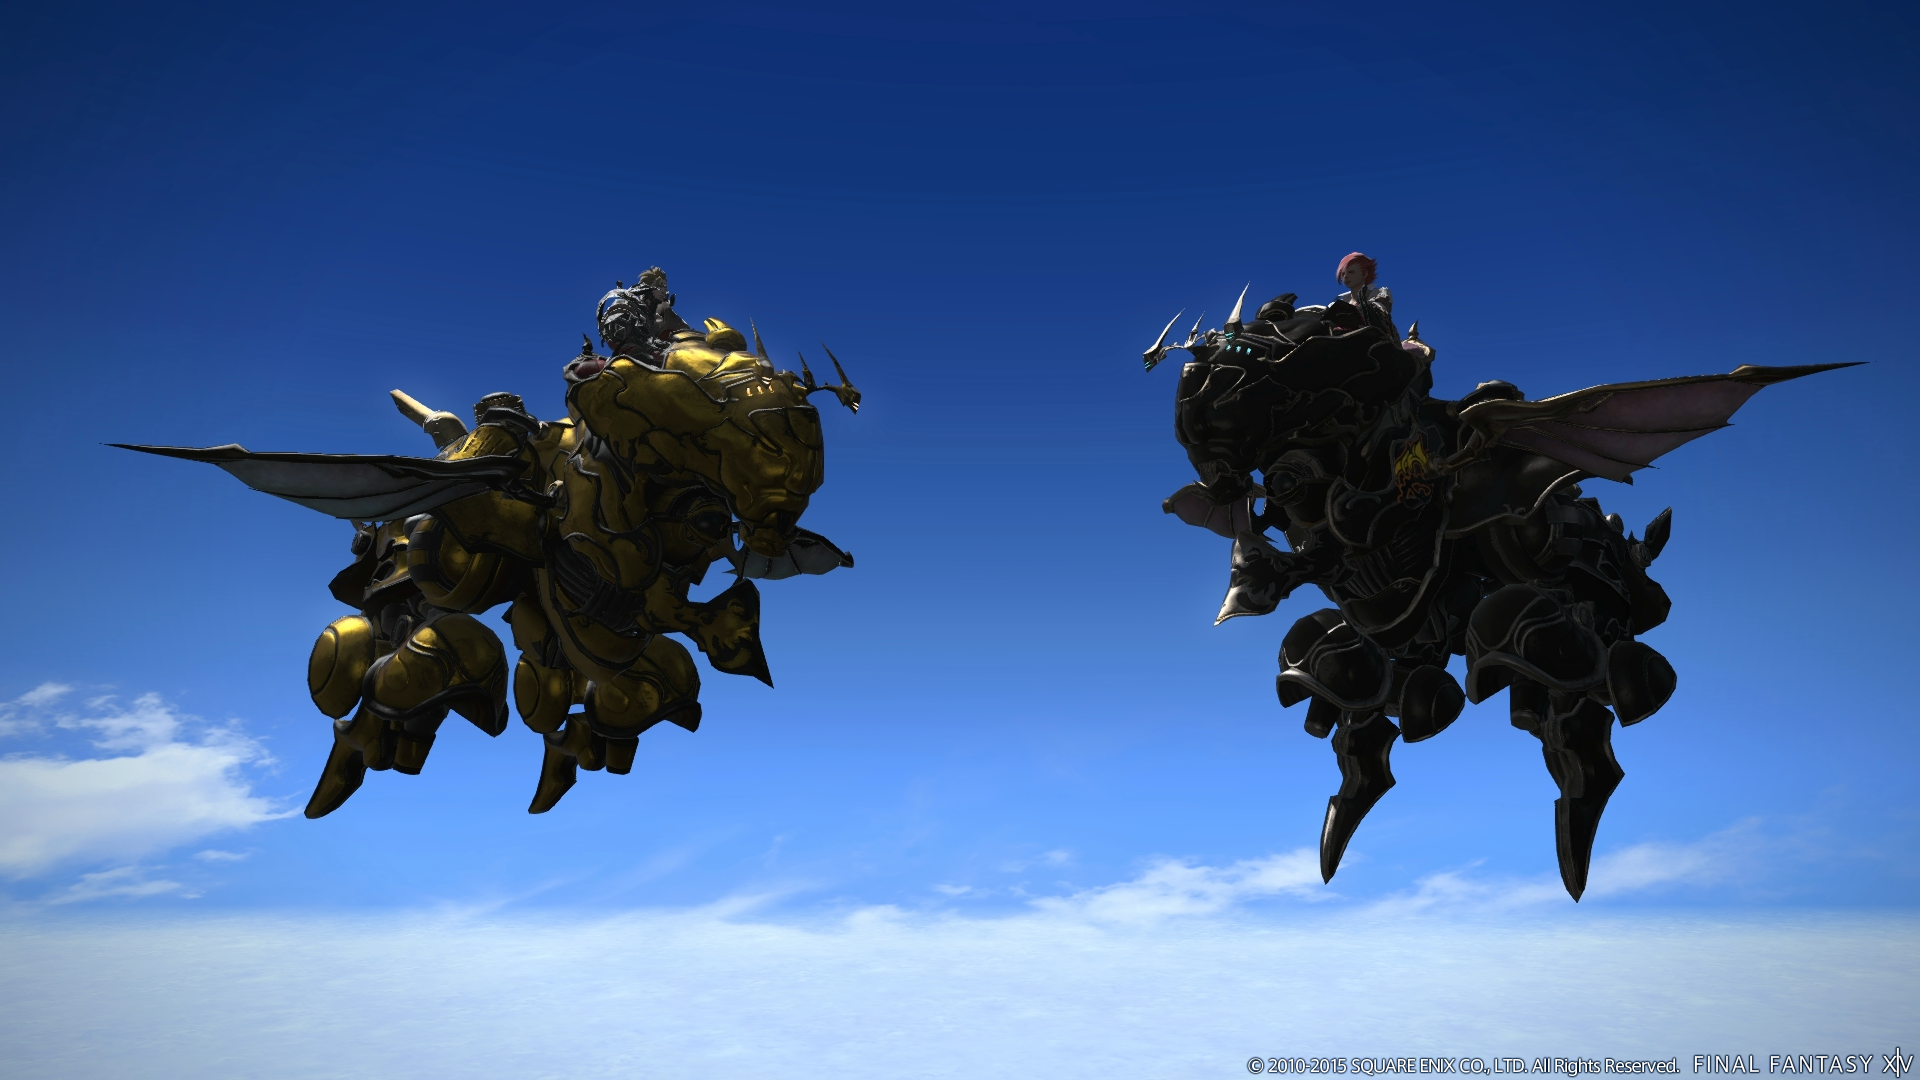 Amber Draught Chocobo, Ceremony Chocobo, Ahriman, Bomb Palanquin, Magitek A...